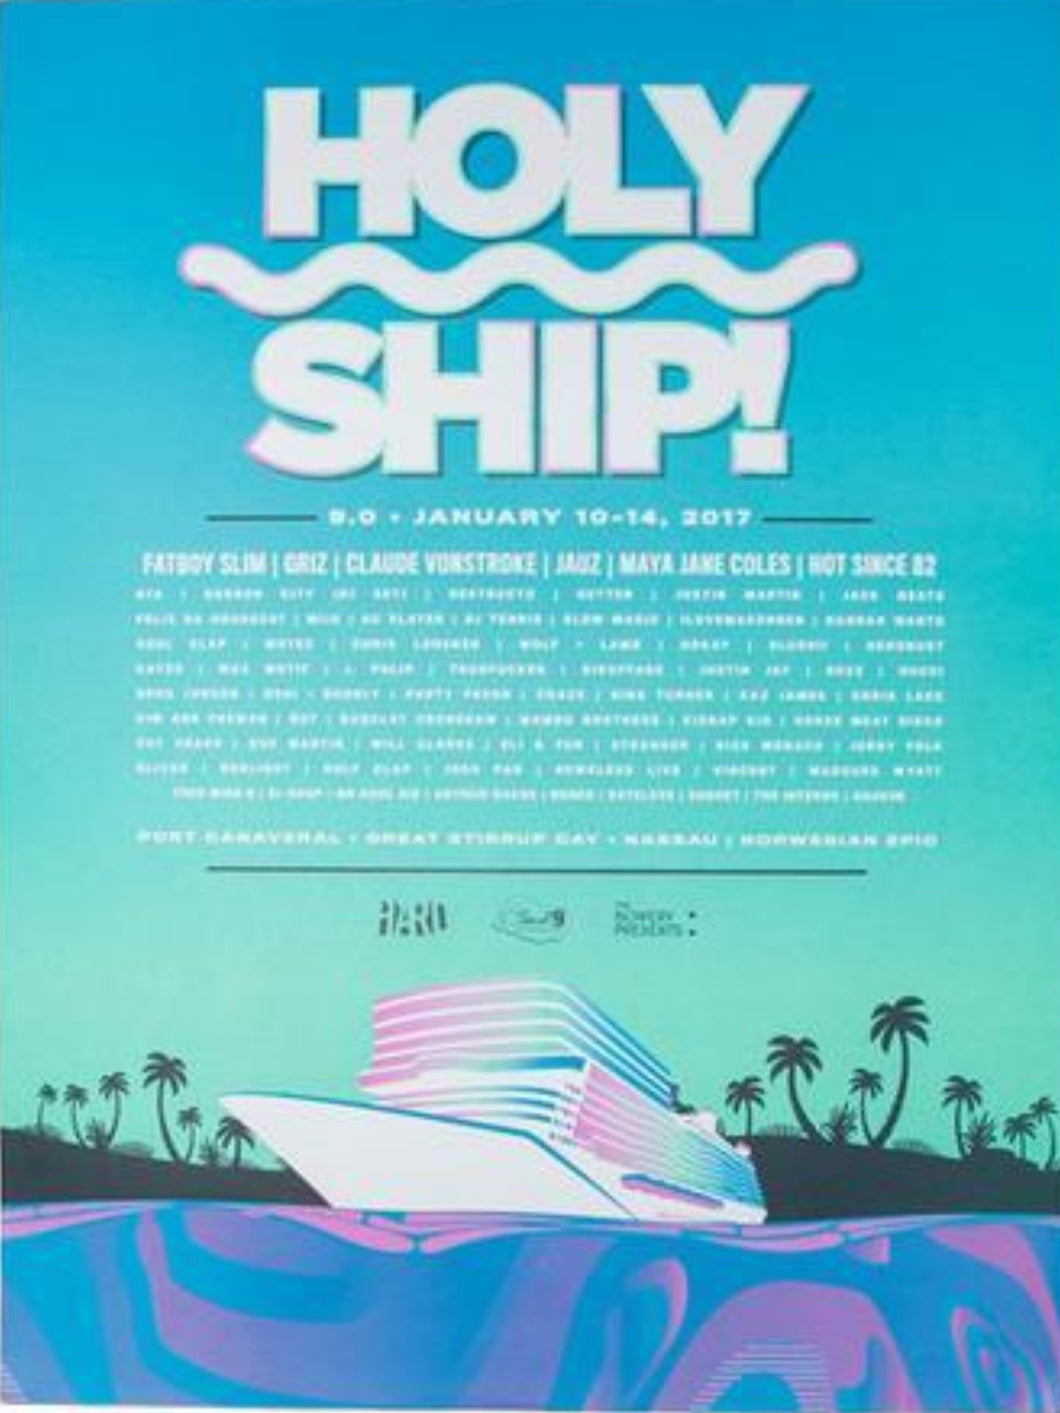 Holy Ship! 9.0 Poster